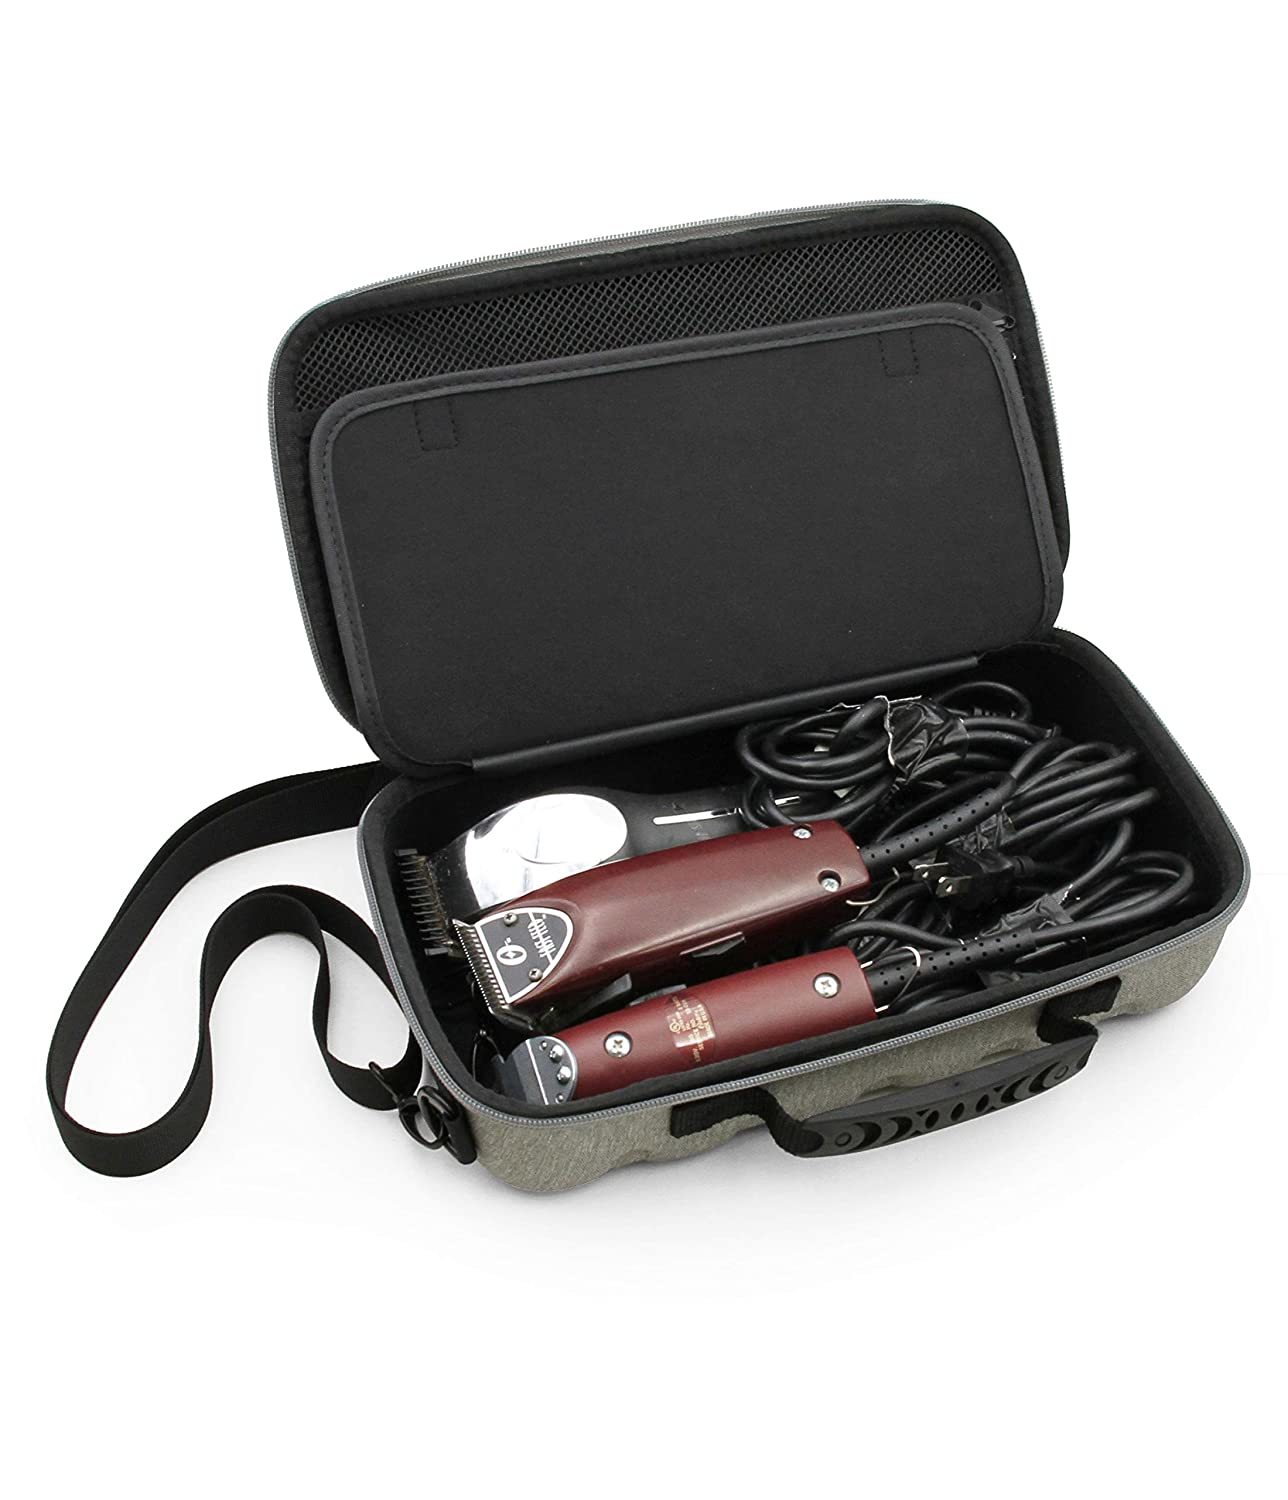 Primary image for Casematix Hair Clipper Case Holds Three Electric Clippers, Hair Buzzers,